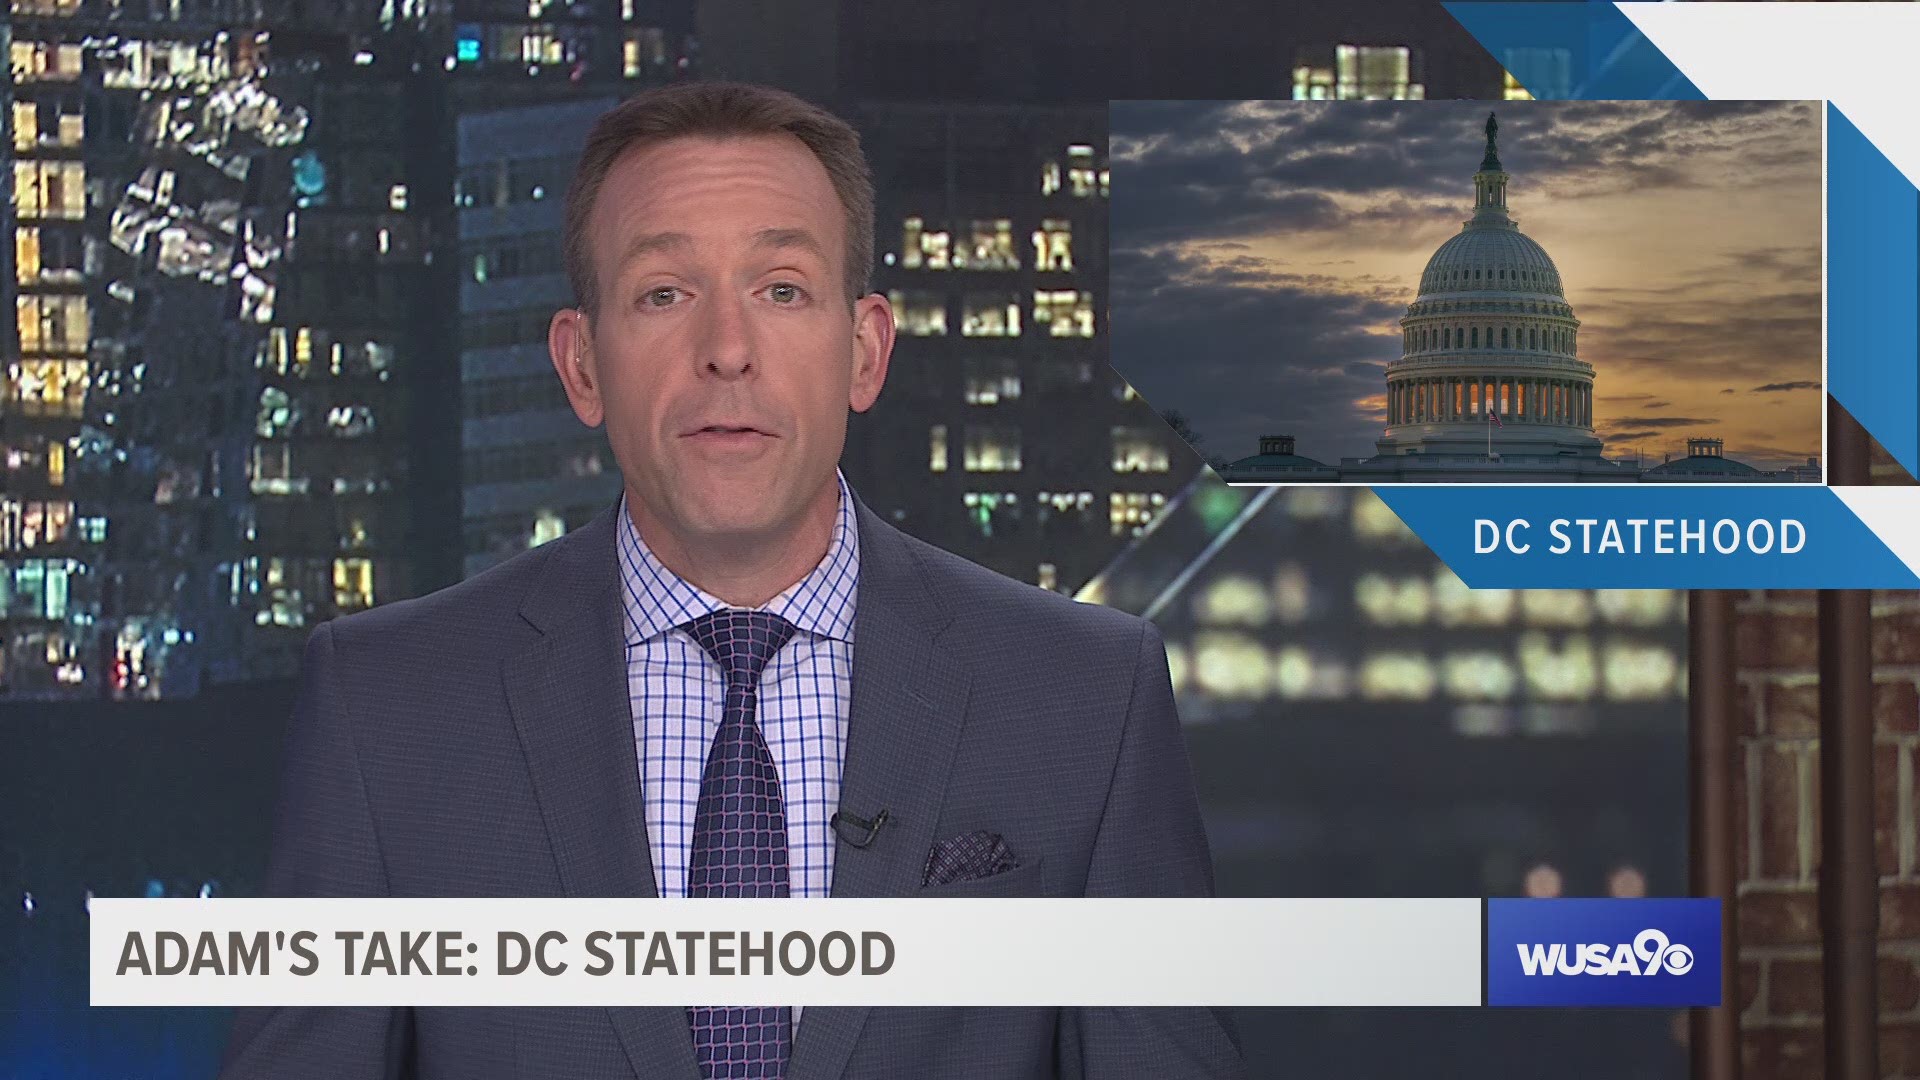 DC has been on the quest to statehood for many years.